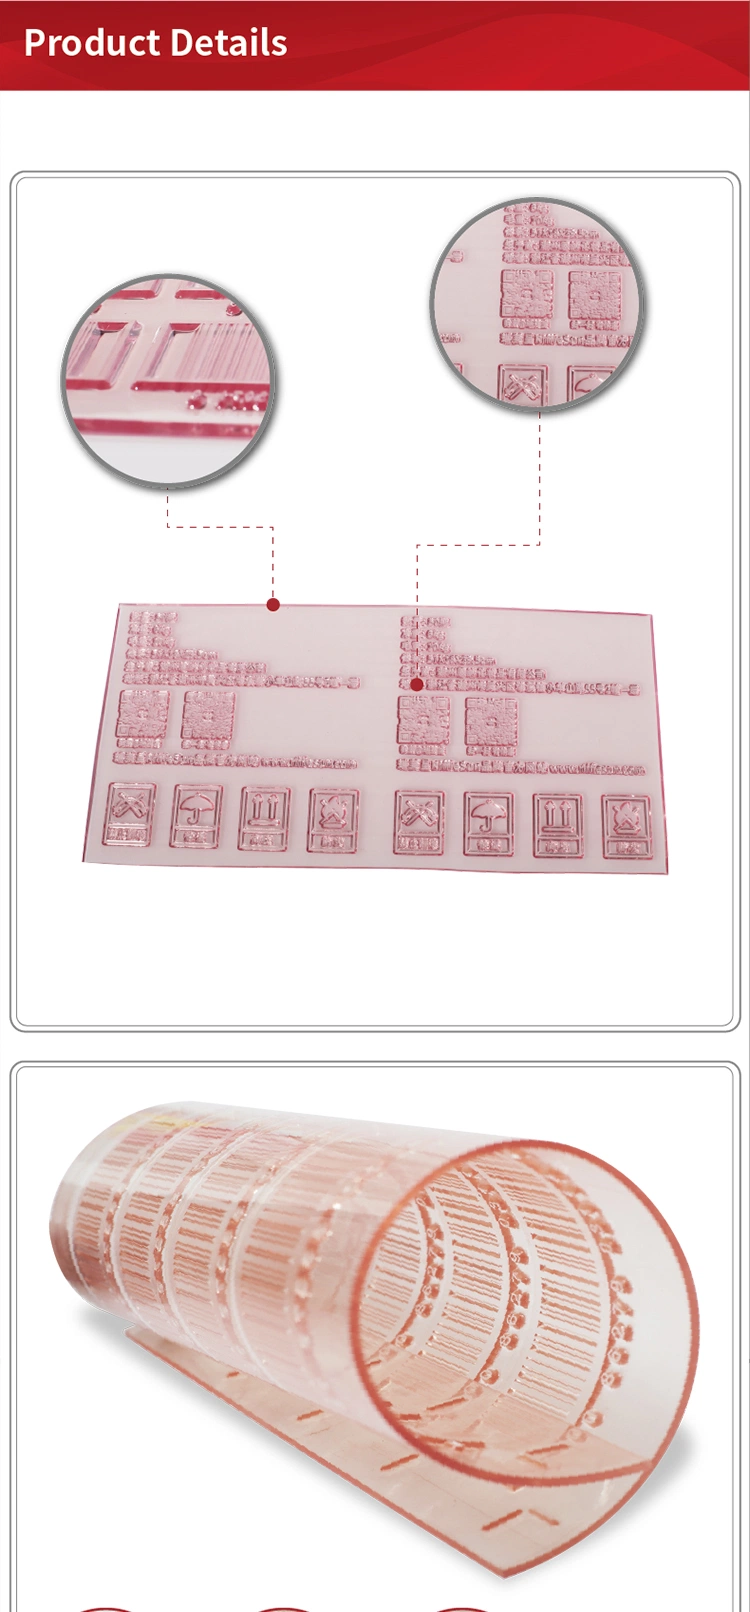 New Product 3.18mm Digital Photopolymer Flexographic Printing Plate